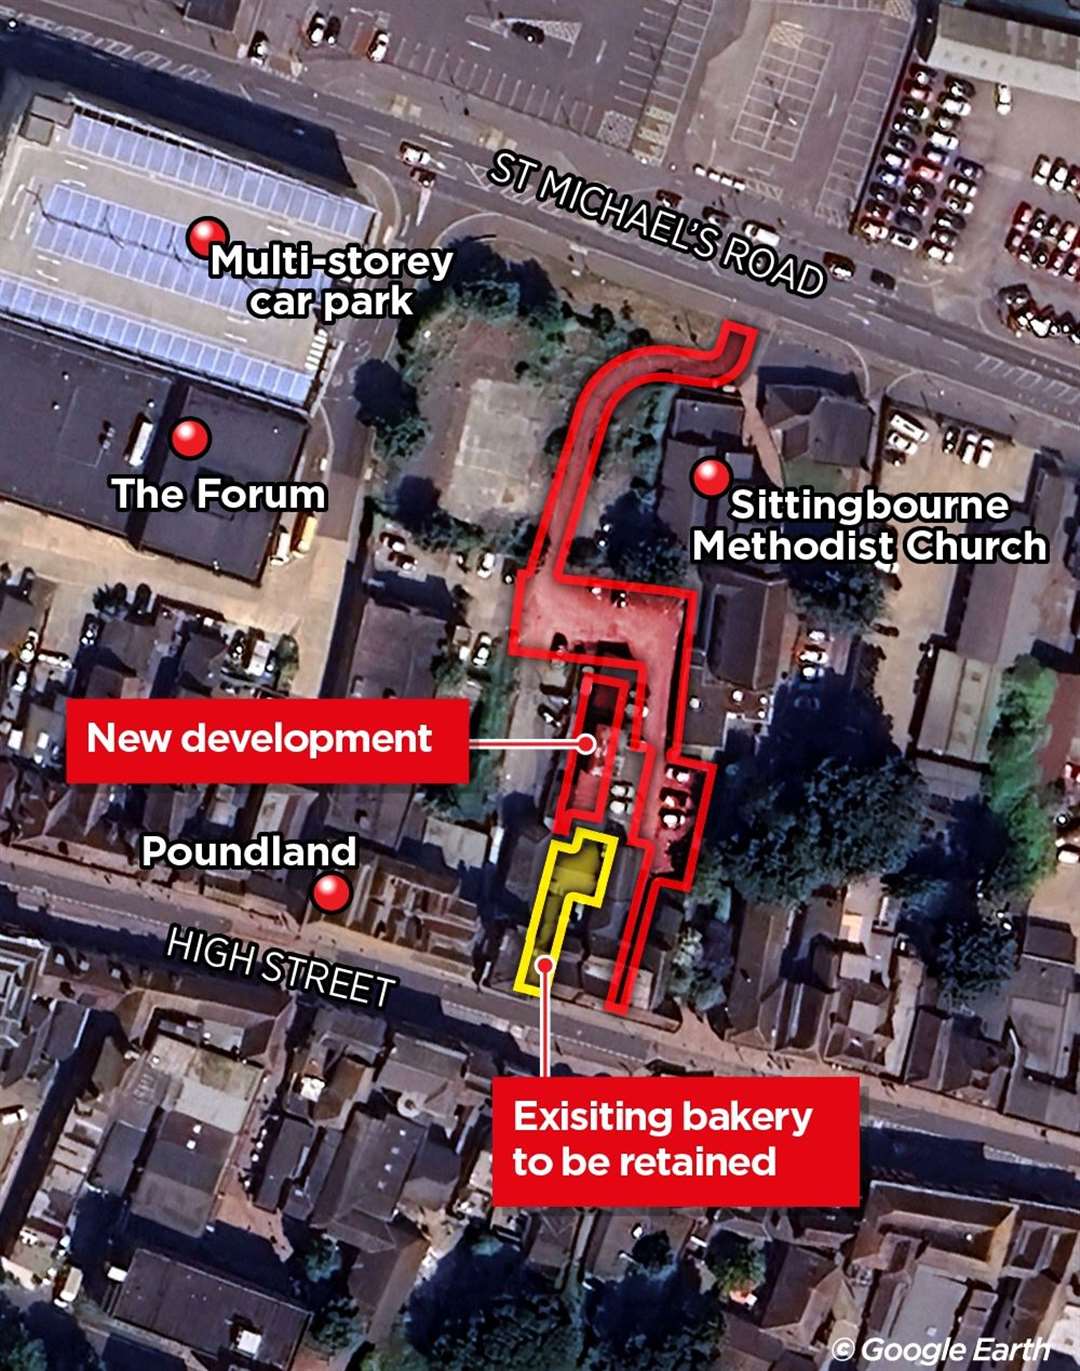 The site location of the A.E. Barrow & Sons Ltd plans